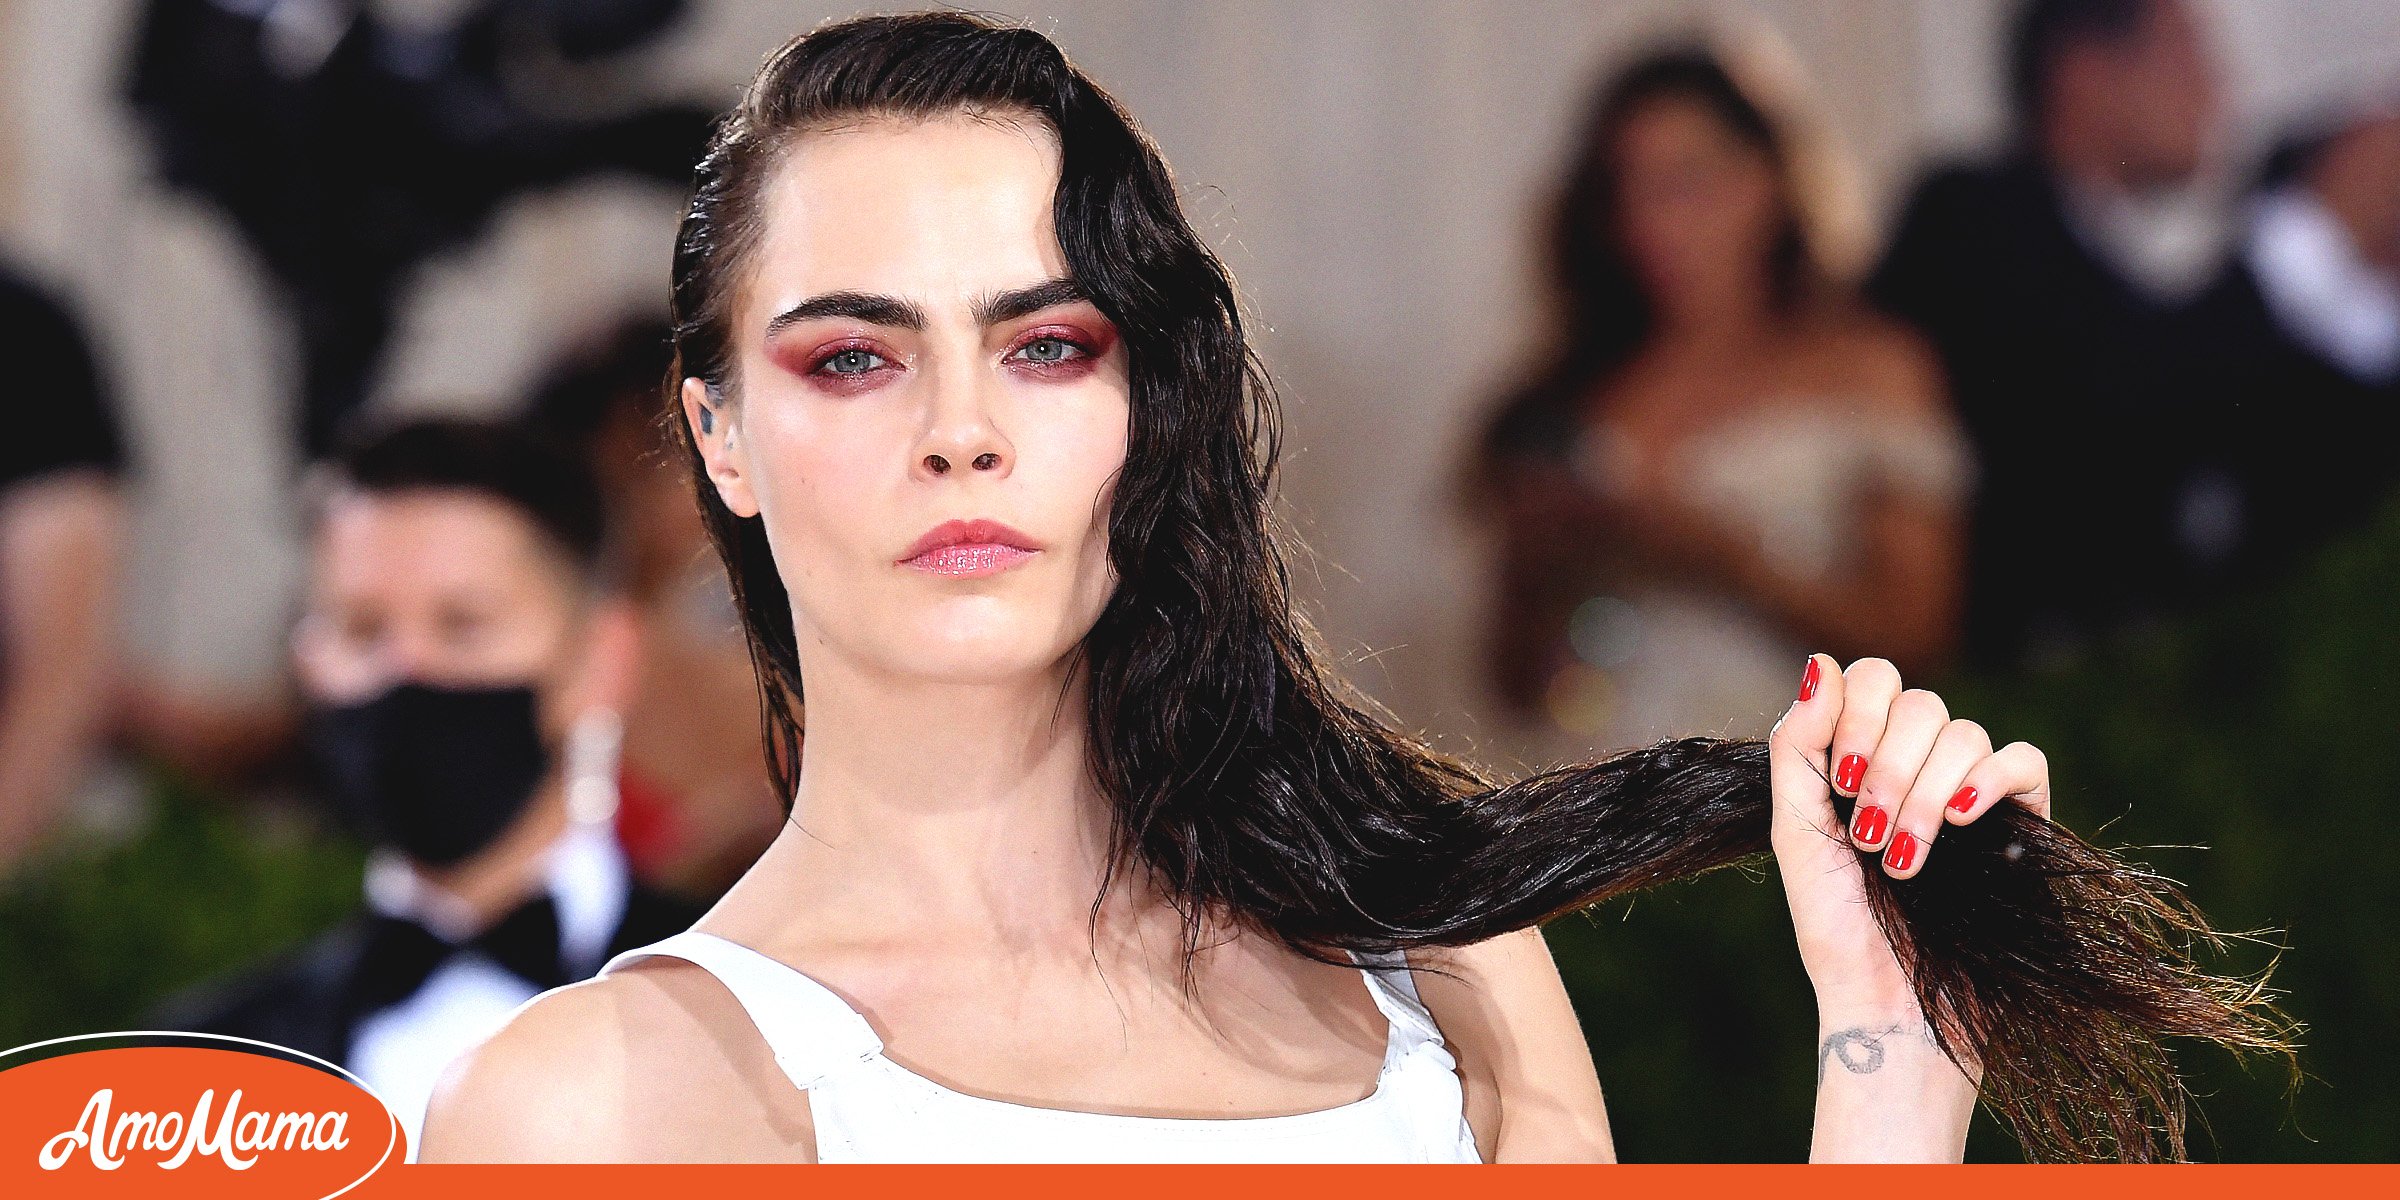 Who Is Cara Delevingne Dating? Inside the Actress and Model’s Private Life